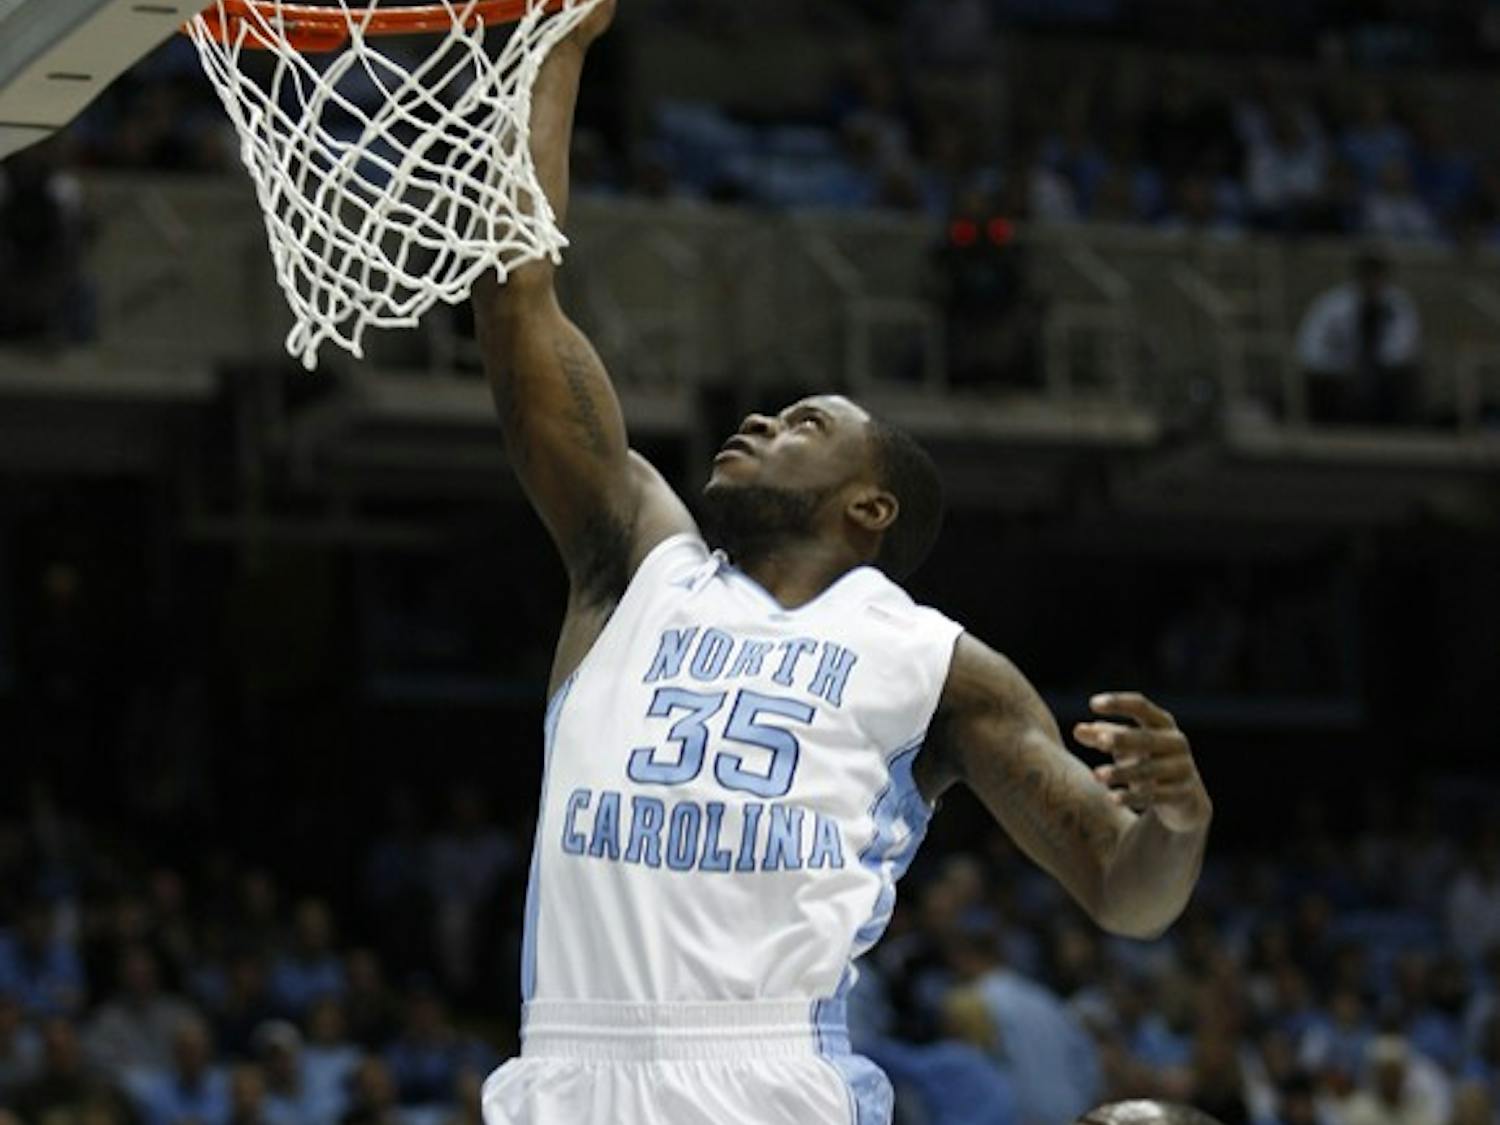 The North Carolina Tar Heels hosted the Long Beach State 49ers at the Dean E. Smith Center on Saturday, Dec. 10, 2011.